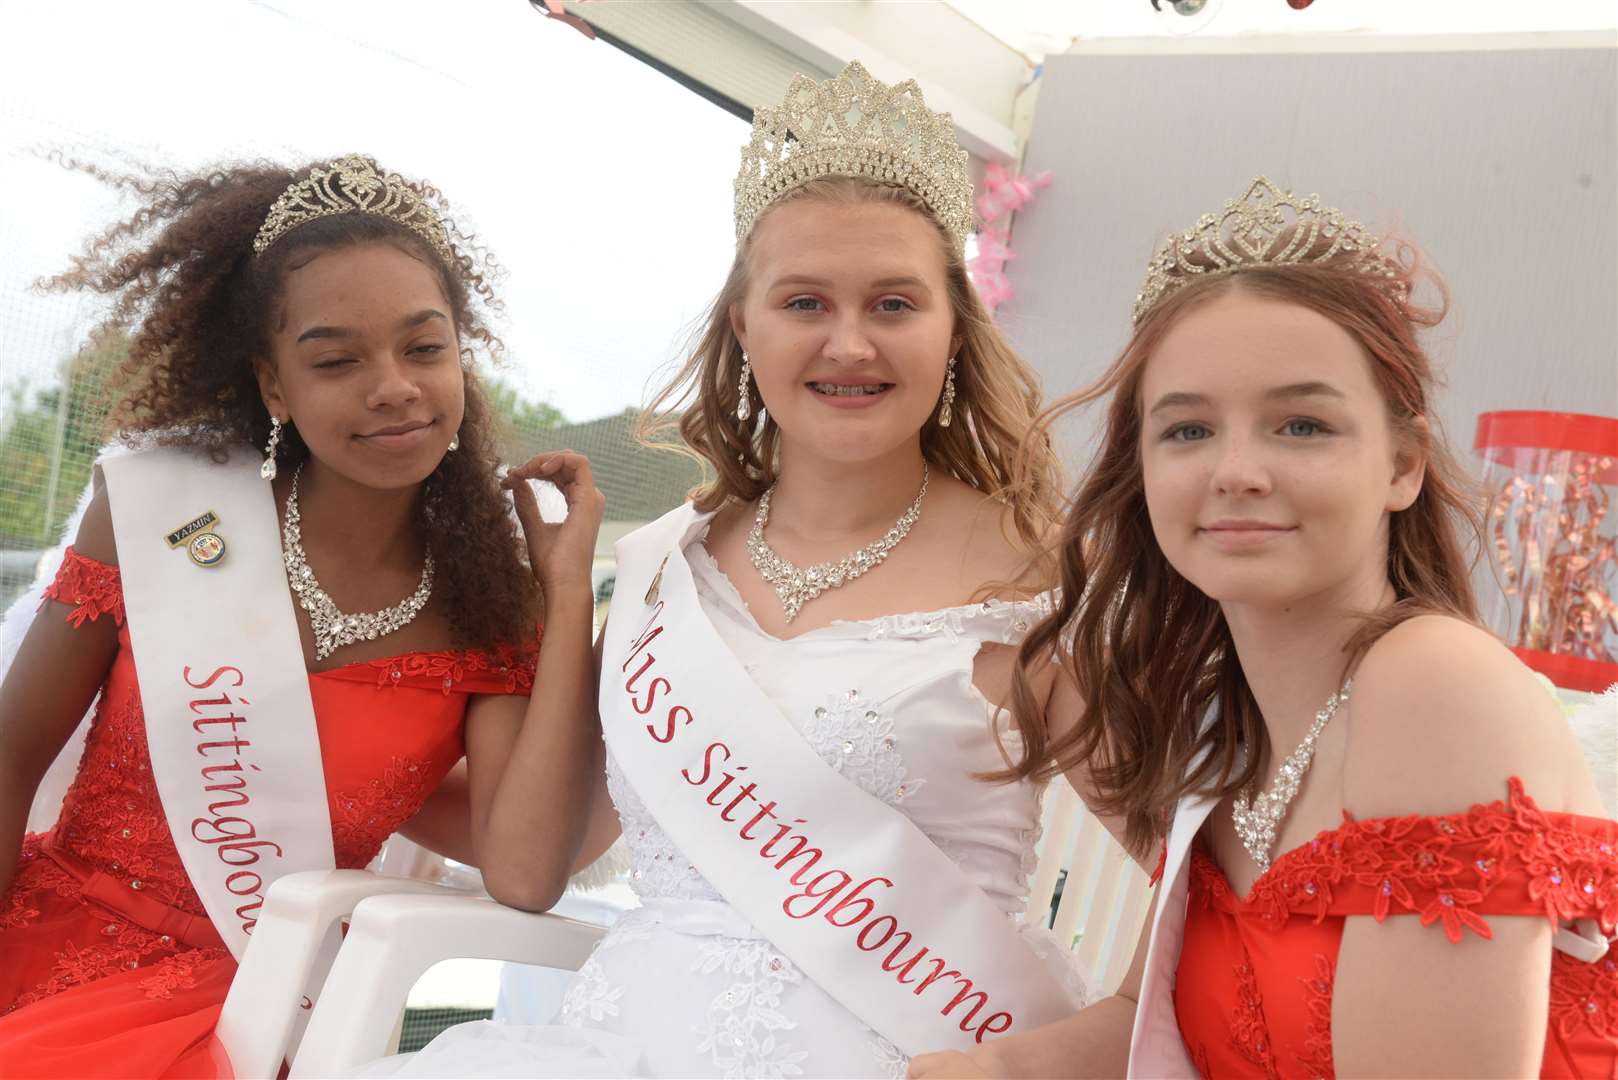 Sittingbourne Carnival Court in 2019. Picture: Chris Davey